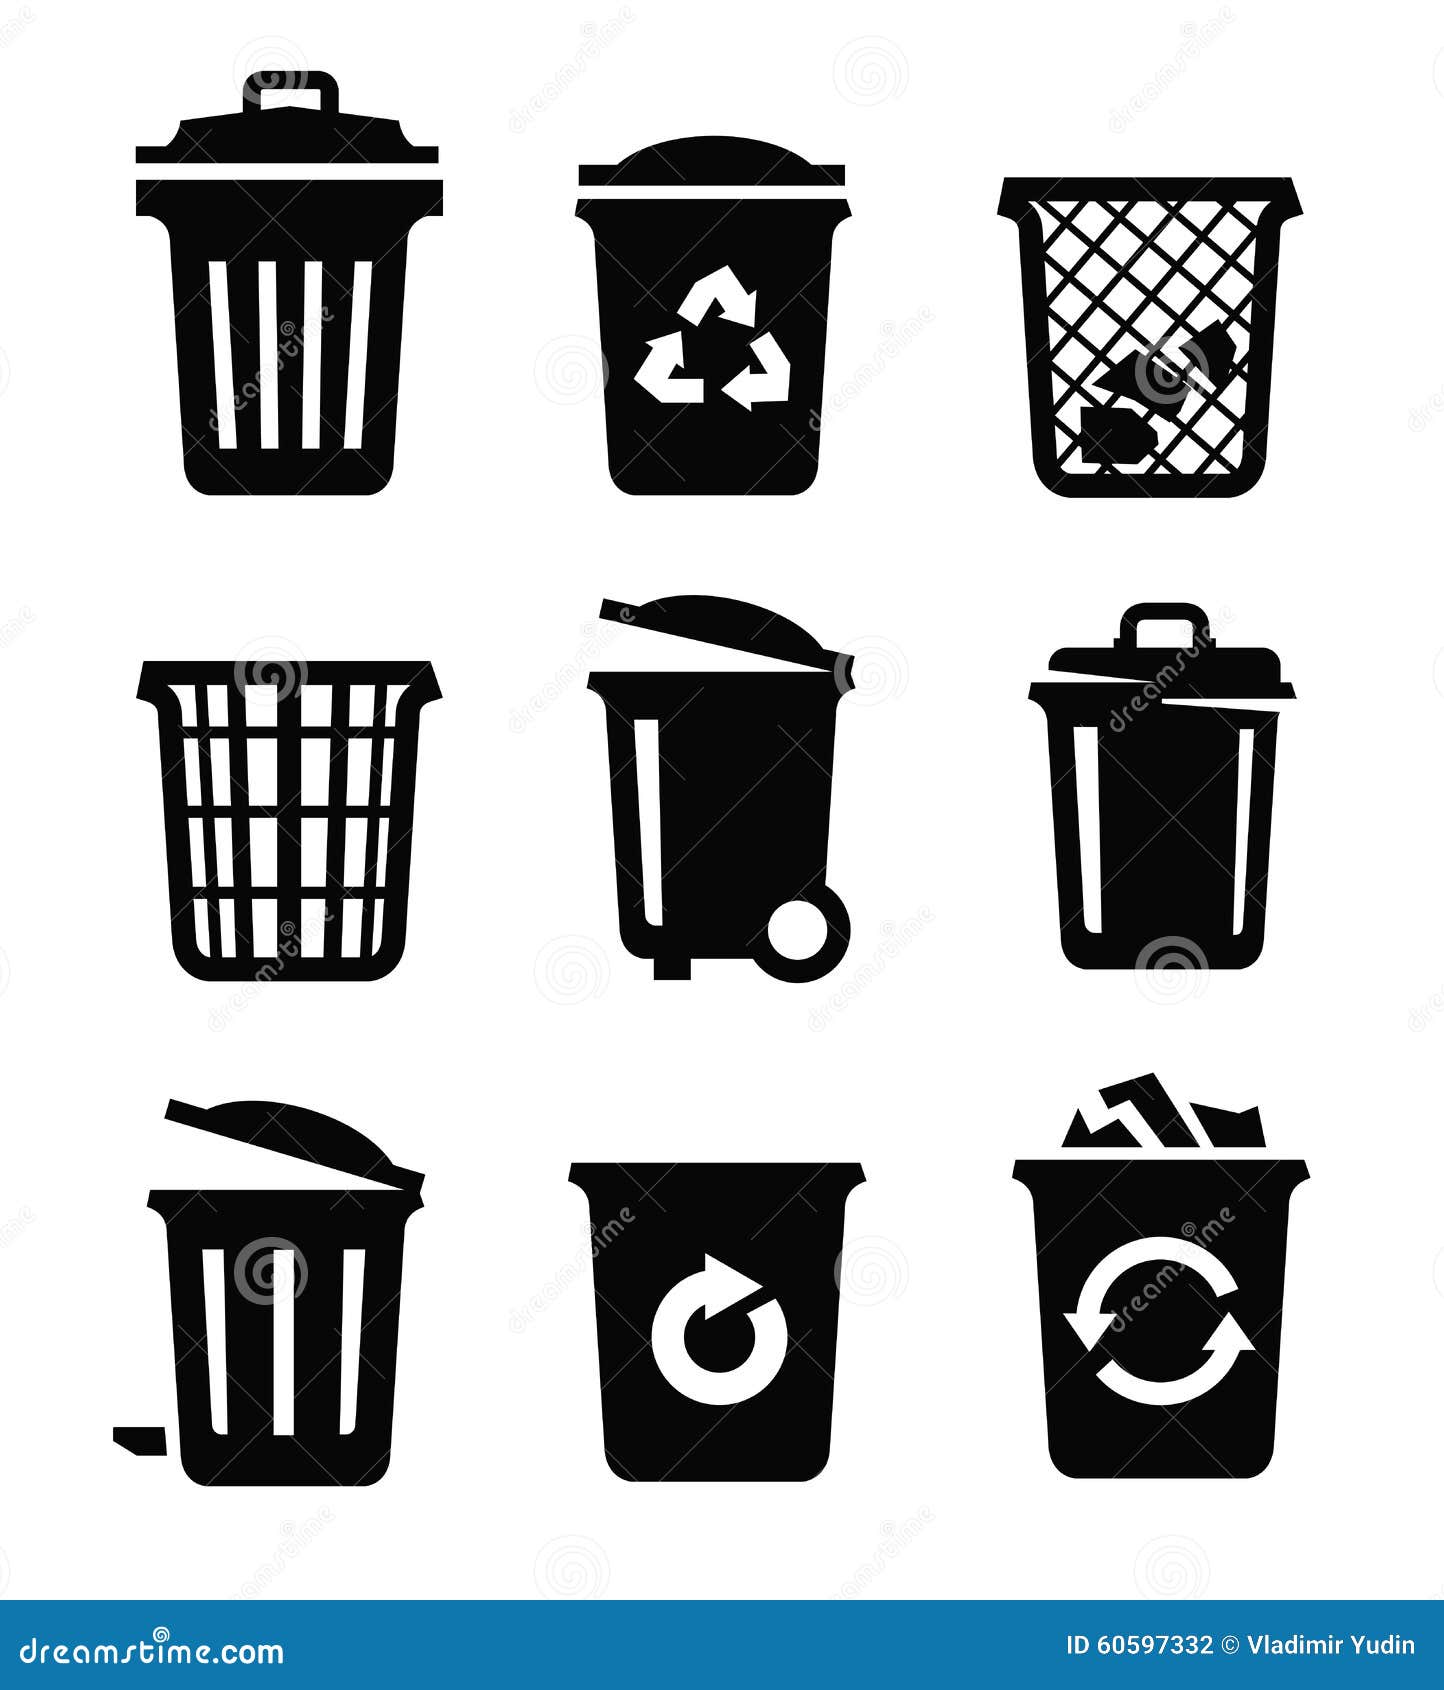 Trash can stock vector. Image of bucket, ecology, trashcan - 60597332